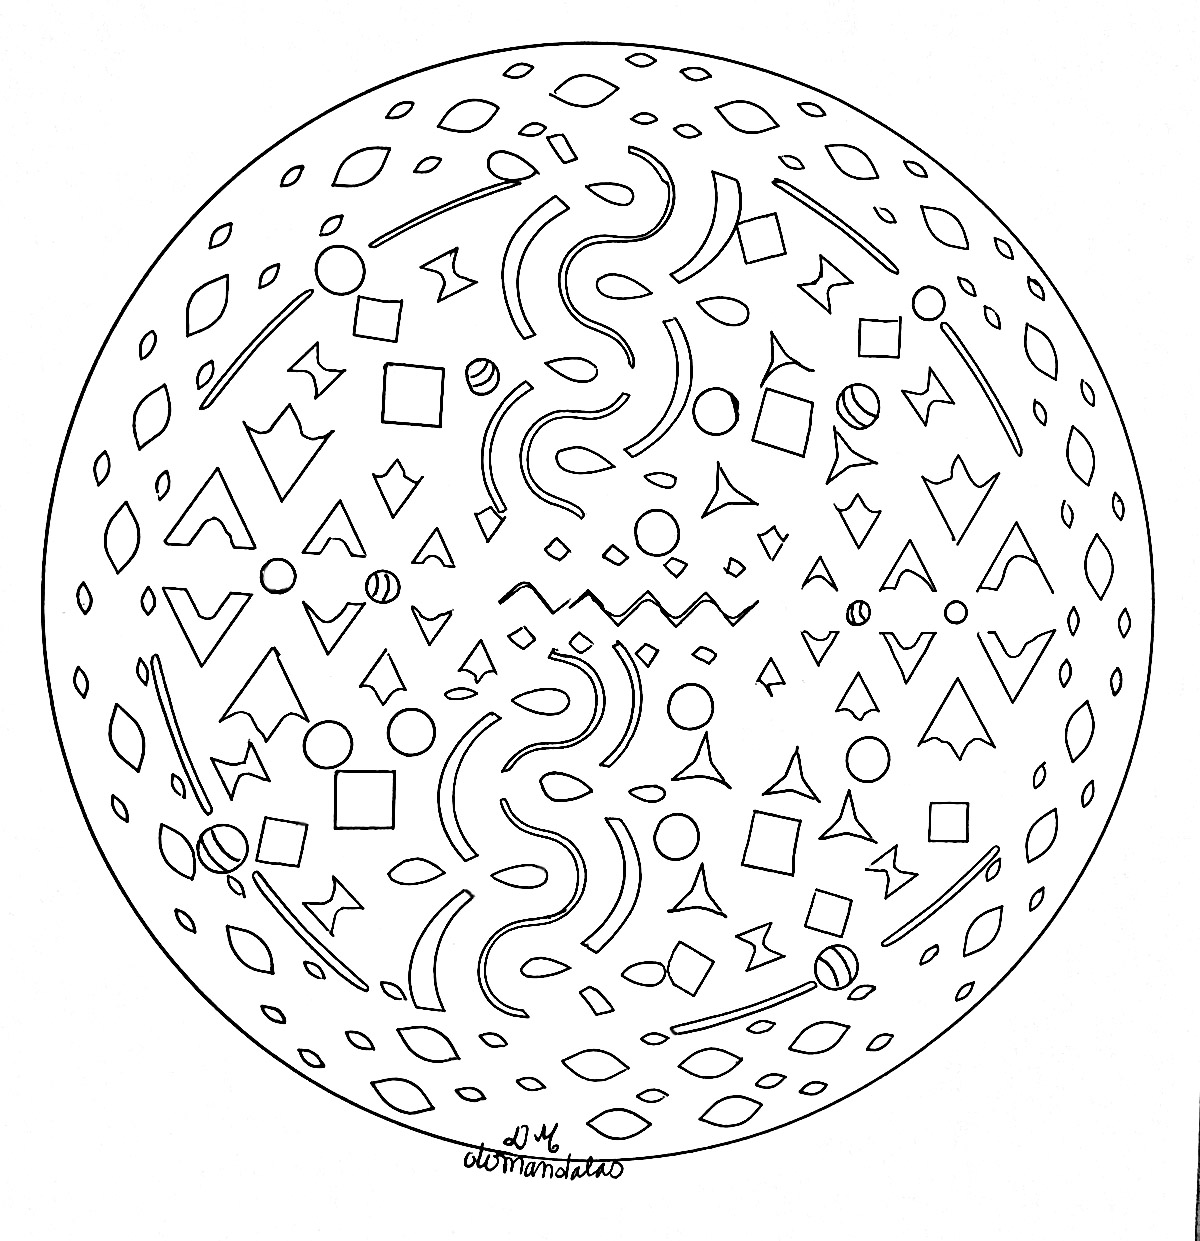 A Mandala guaranteed 100% Zen, for a moment of pure relaxation. You will quickly feel the benefits of coloring. Do whatever it takes to get rid of any distractions that may interfere with your coloring.